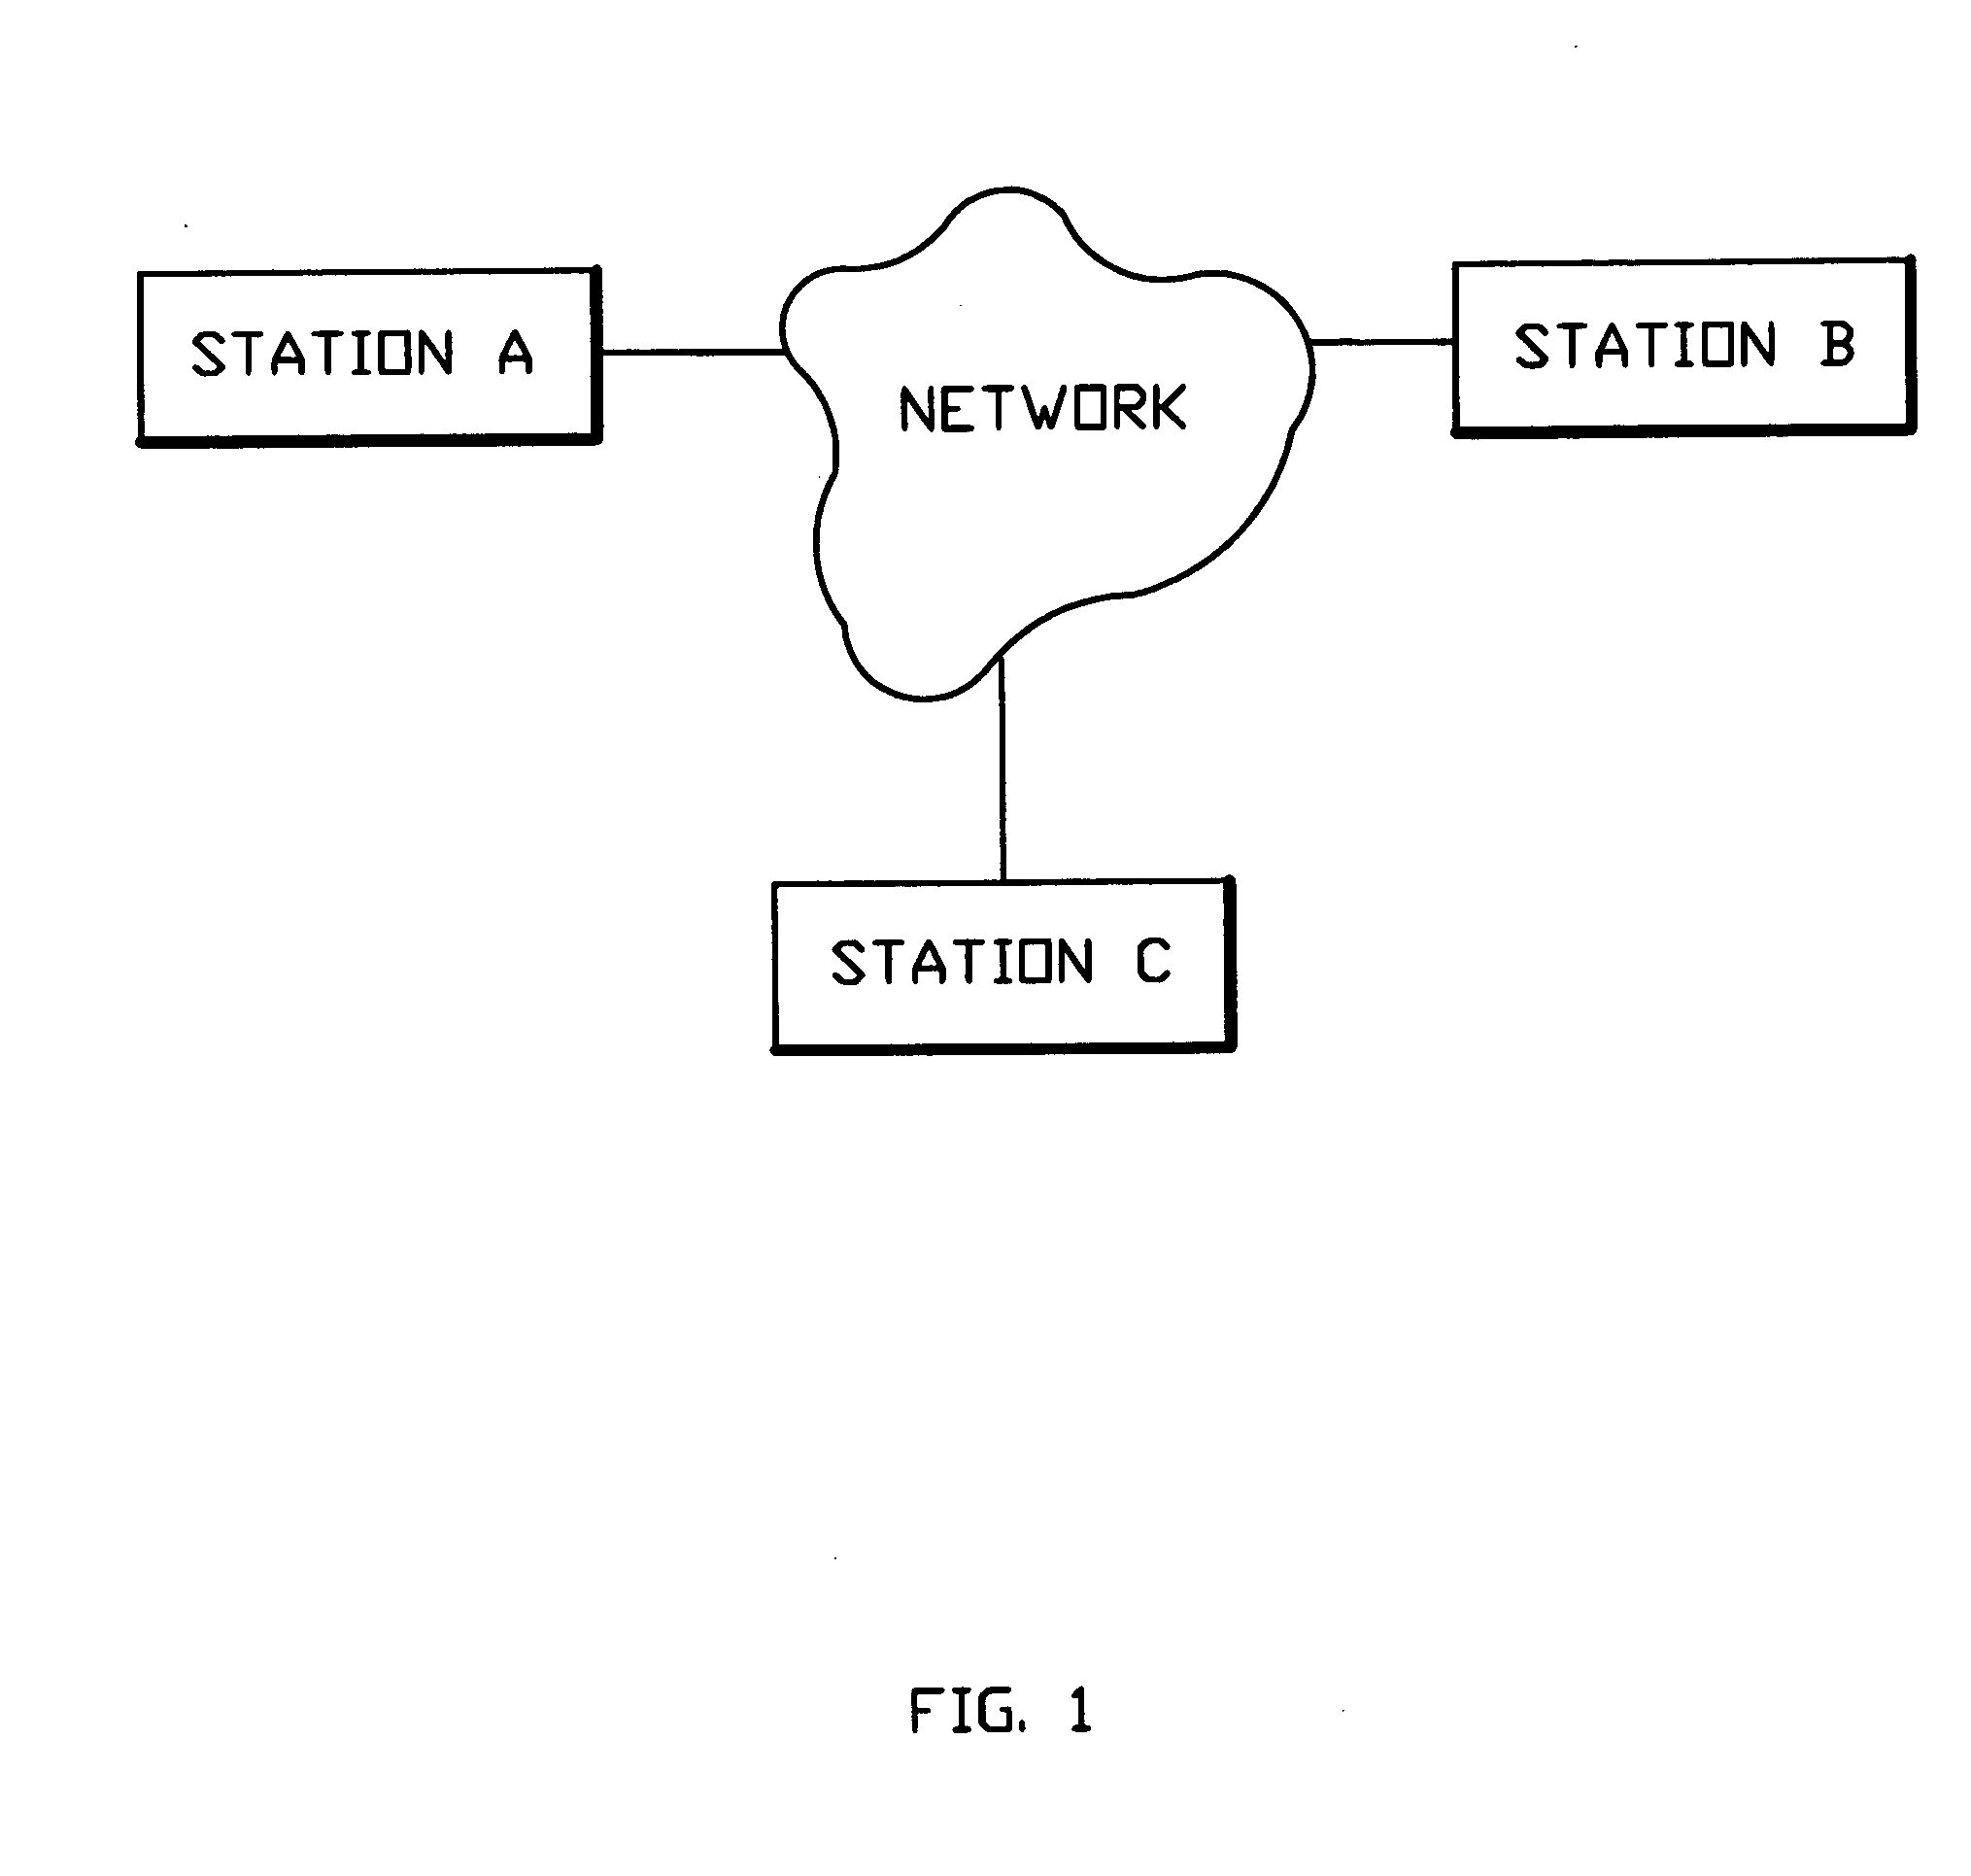 System and method for monitoring performance, analyzing capacity and utilization, and planning capacity for networks and intelligent, network connected processes